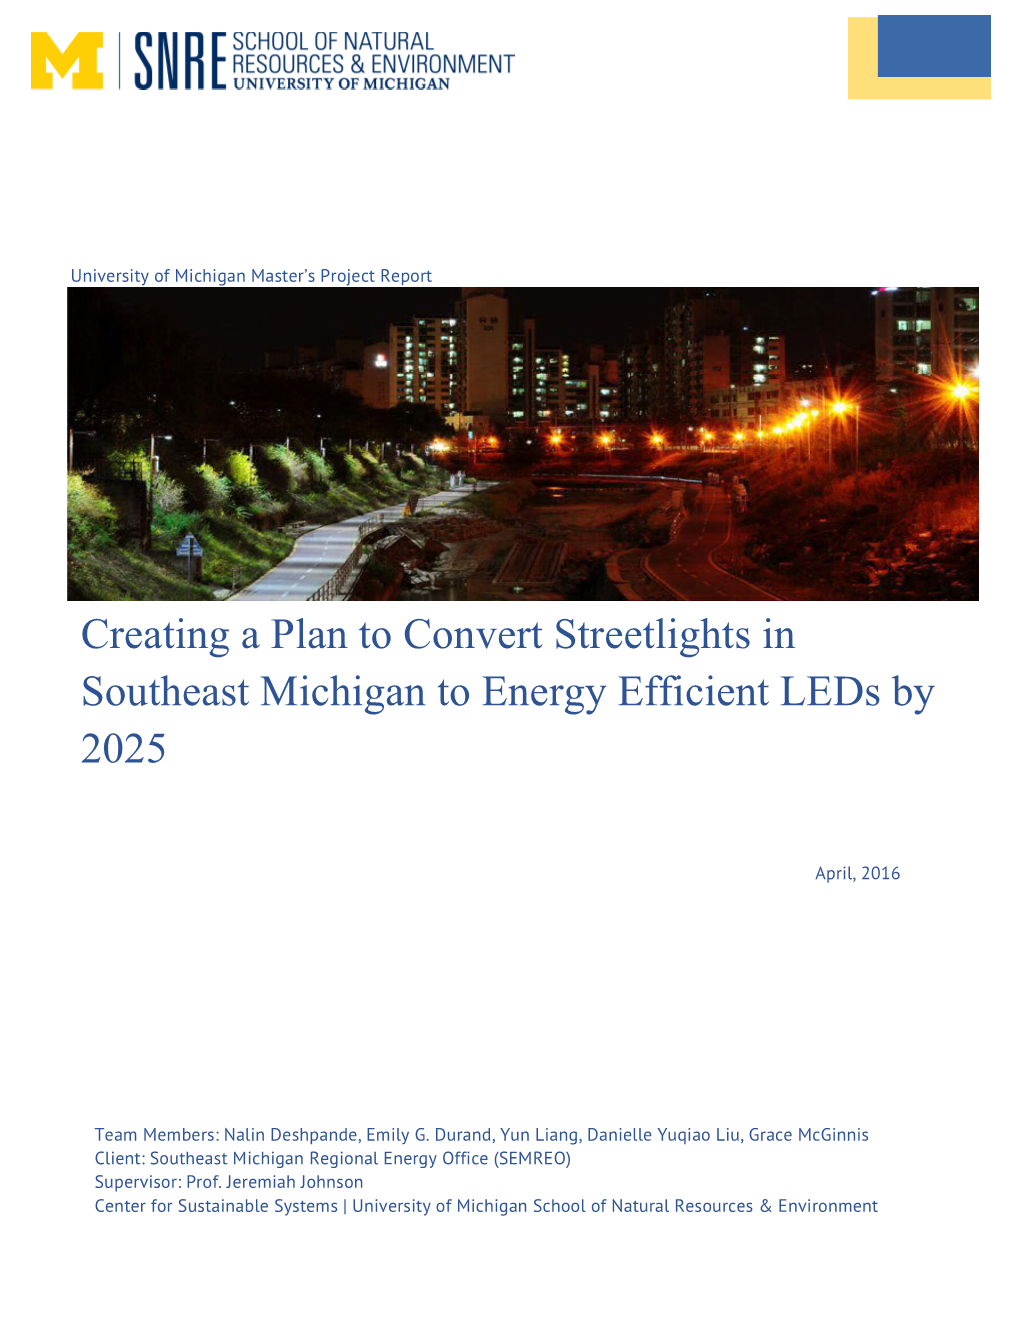 Creating a Plan to Convert Streetlights in Southeast Michigan to Energy Efficient Leds by 2025